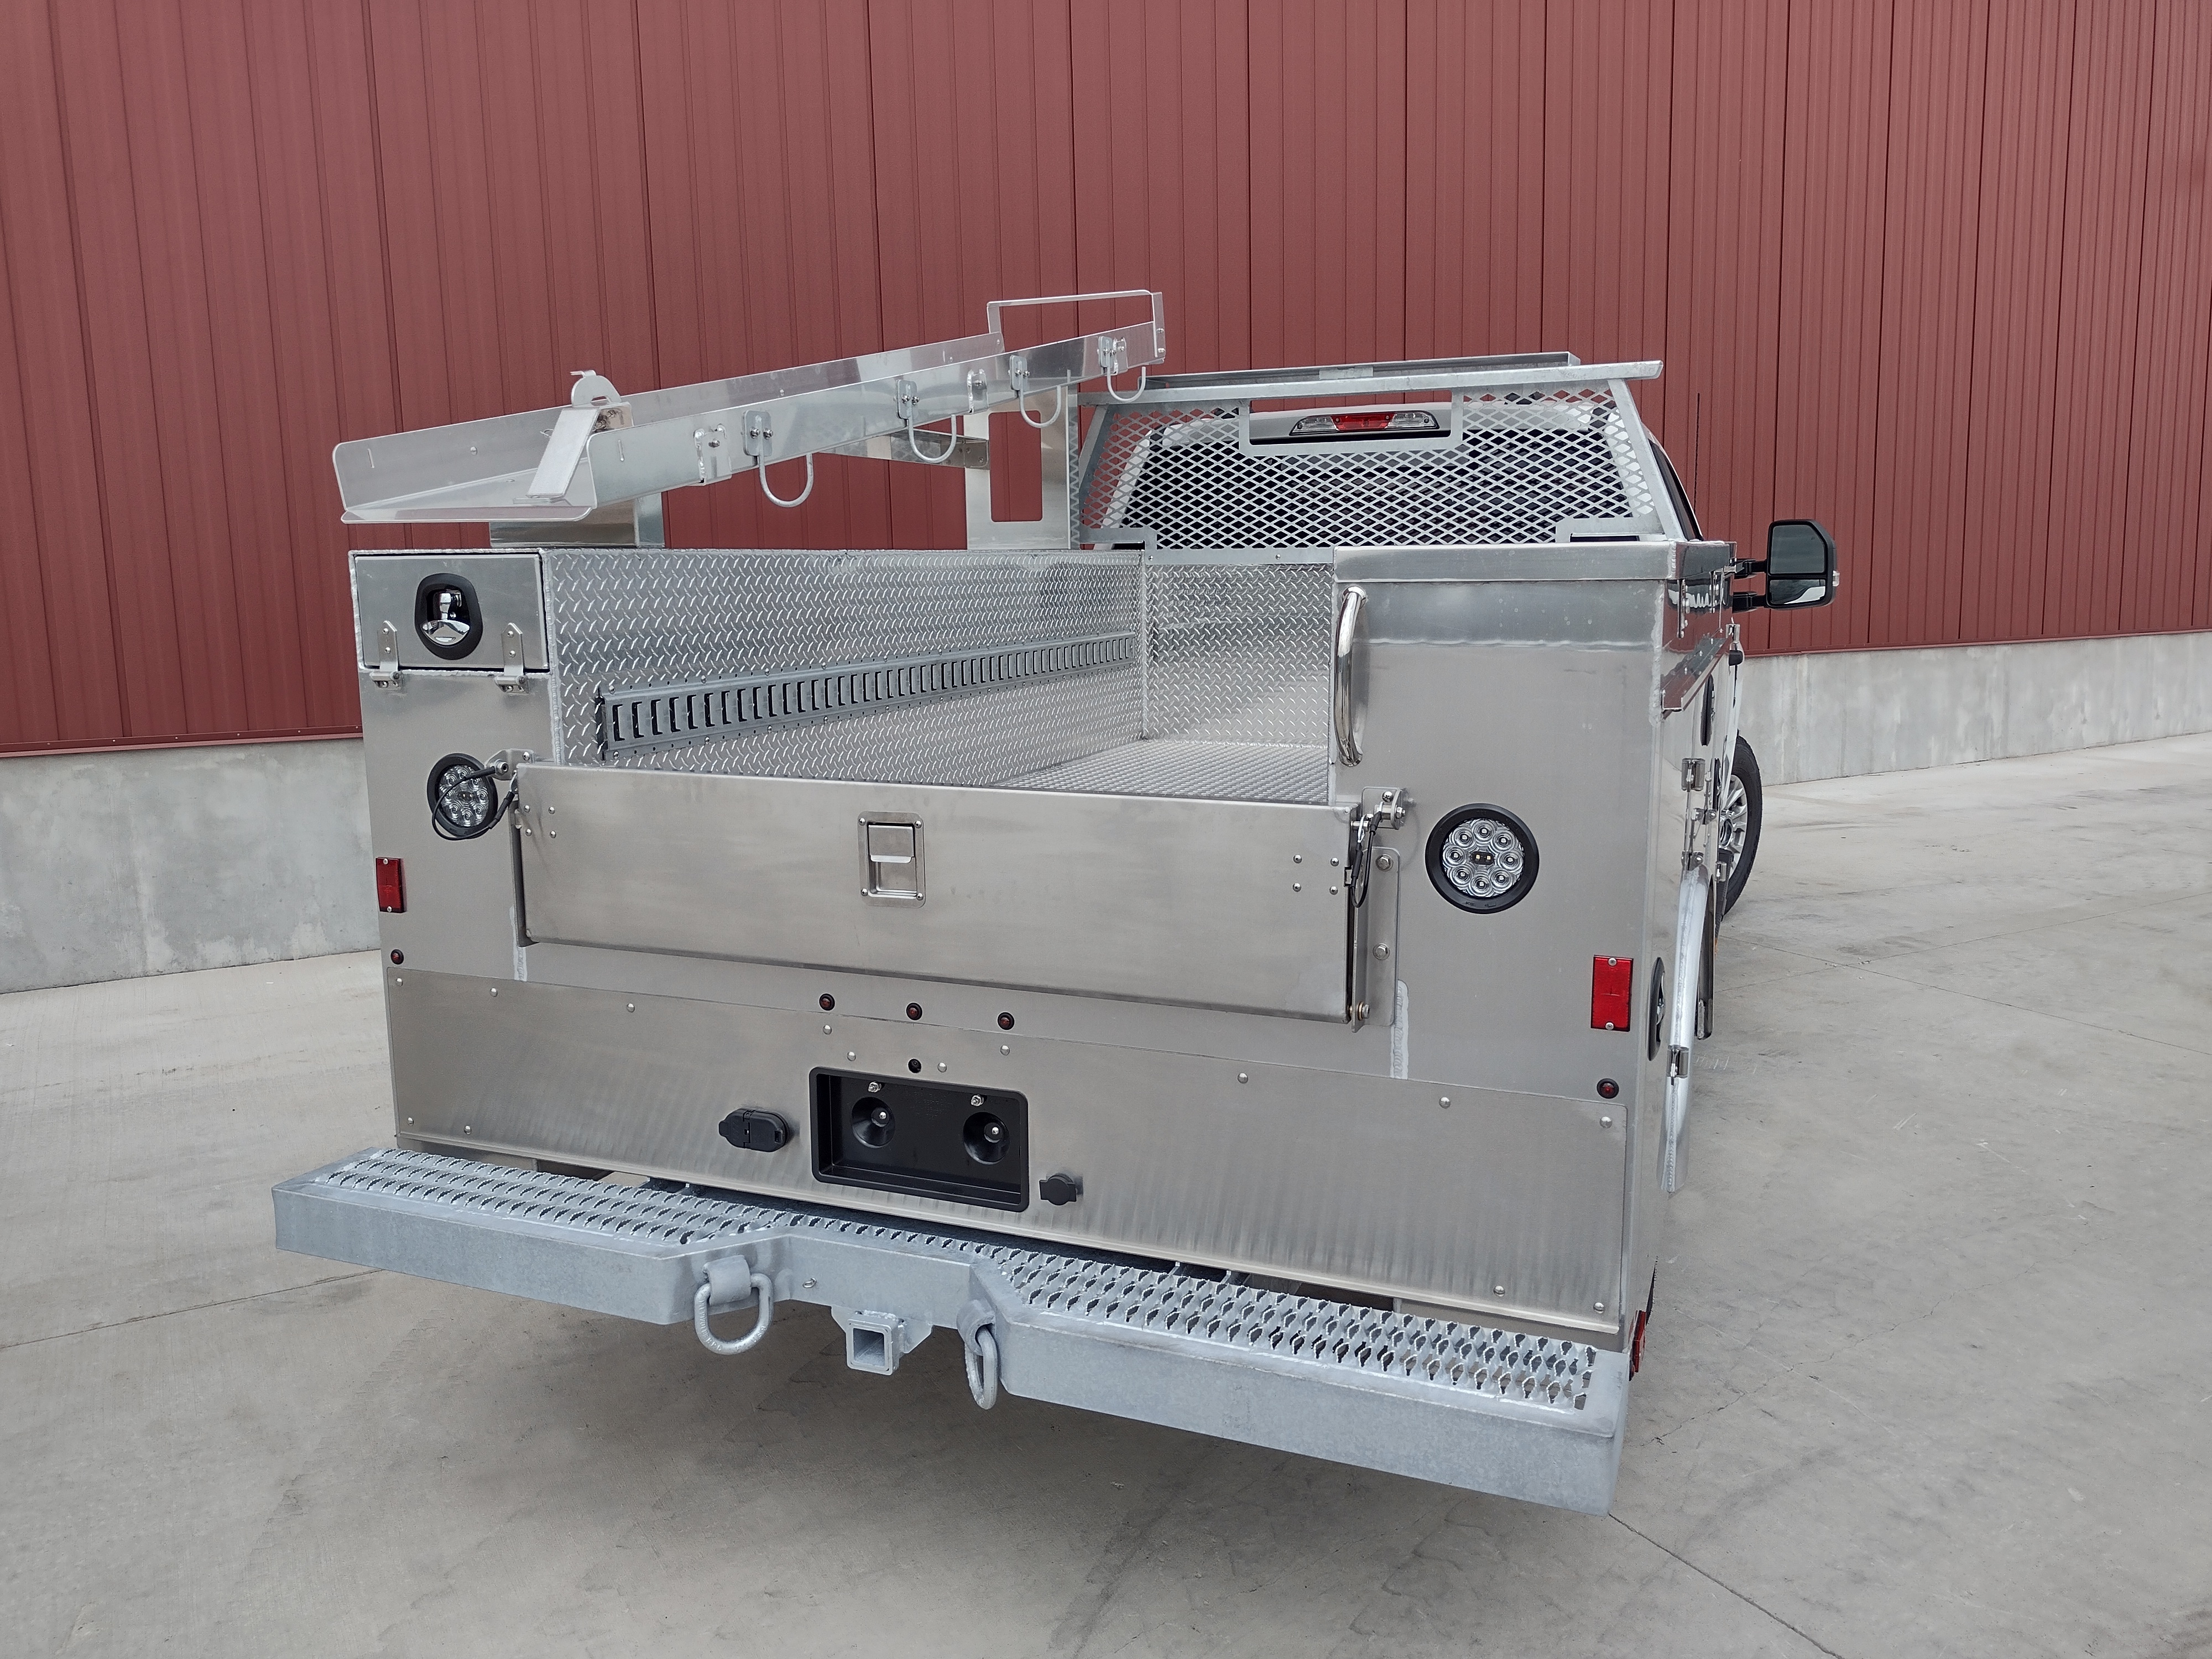 Rear view slightly from the right side of a Sauber Mfg. Co. NexGen Aluminum Service Body. Shown in natural aluminum with stainless steel rear tailgate, stop/turn/backup taillights and lighted recessed ABS plastic license plate holder. Galvanized step bumper with towing provisions. The truck is shown in front of a red metal building on concrete.